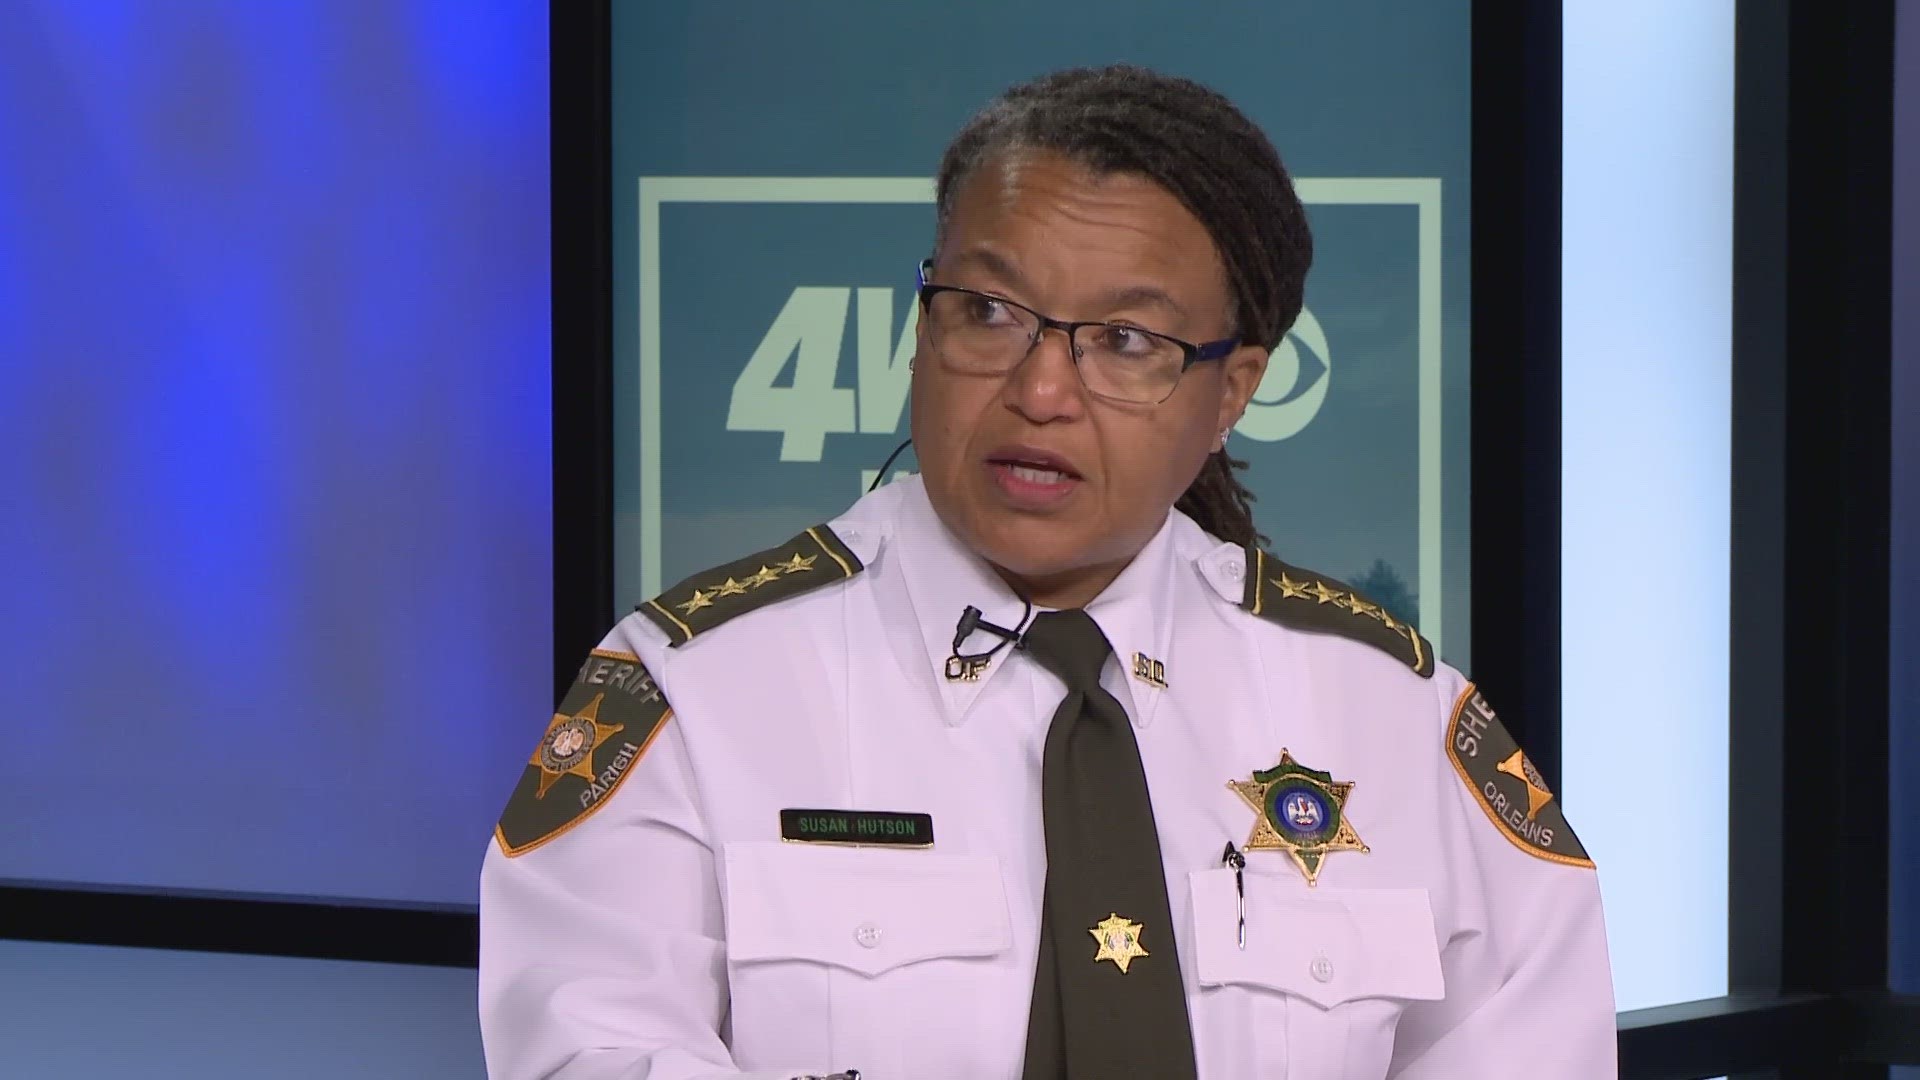 Orleans Parish Sheriff Susan Hutson explains why a millage to raise property taxes in New Orleans is important for the jail and public safety.